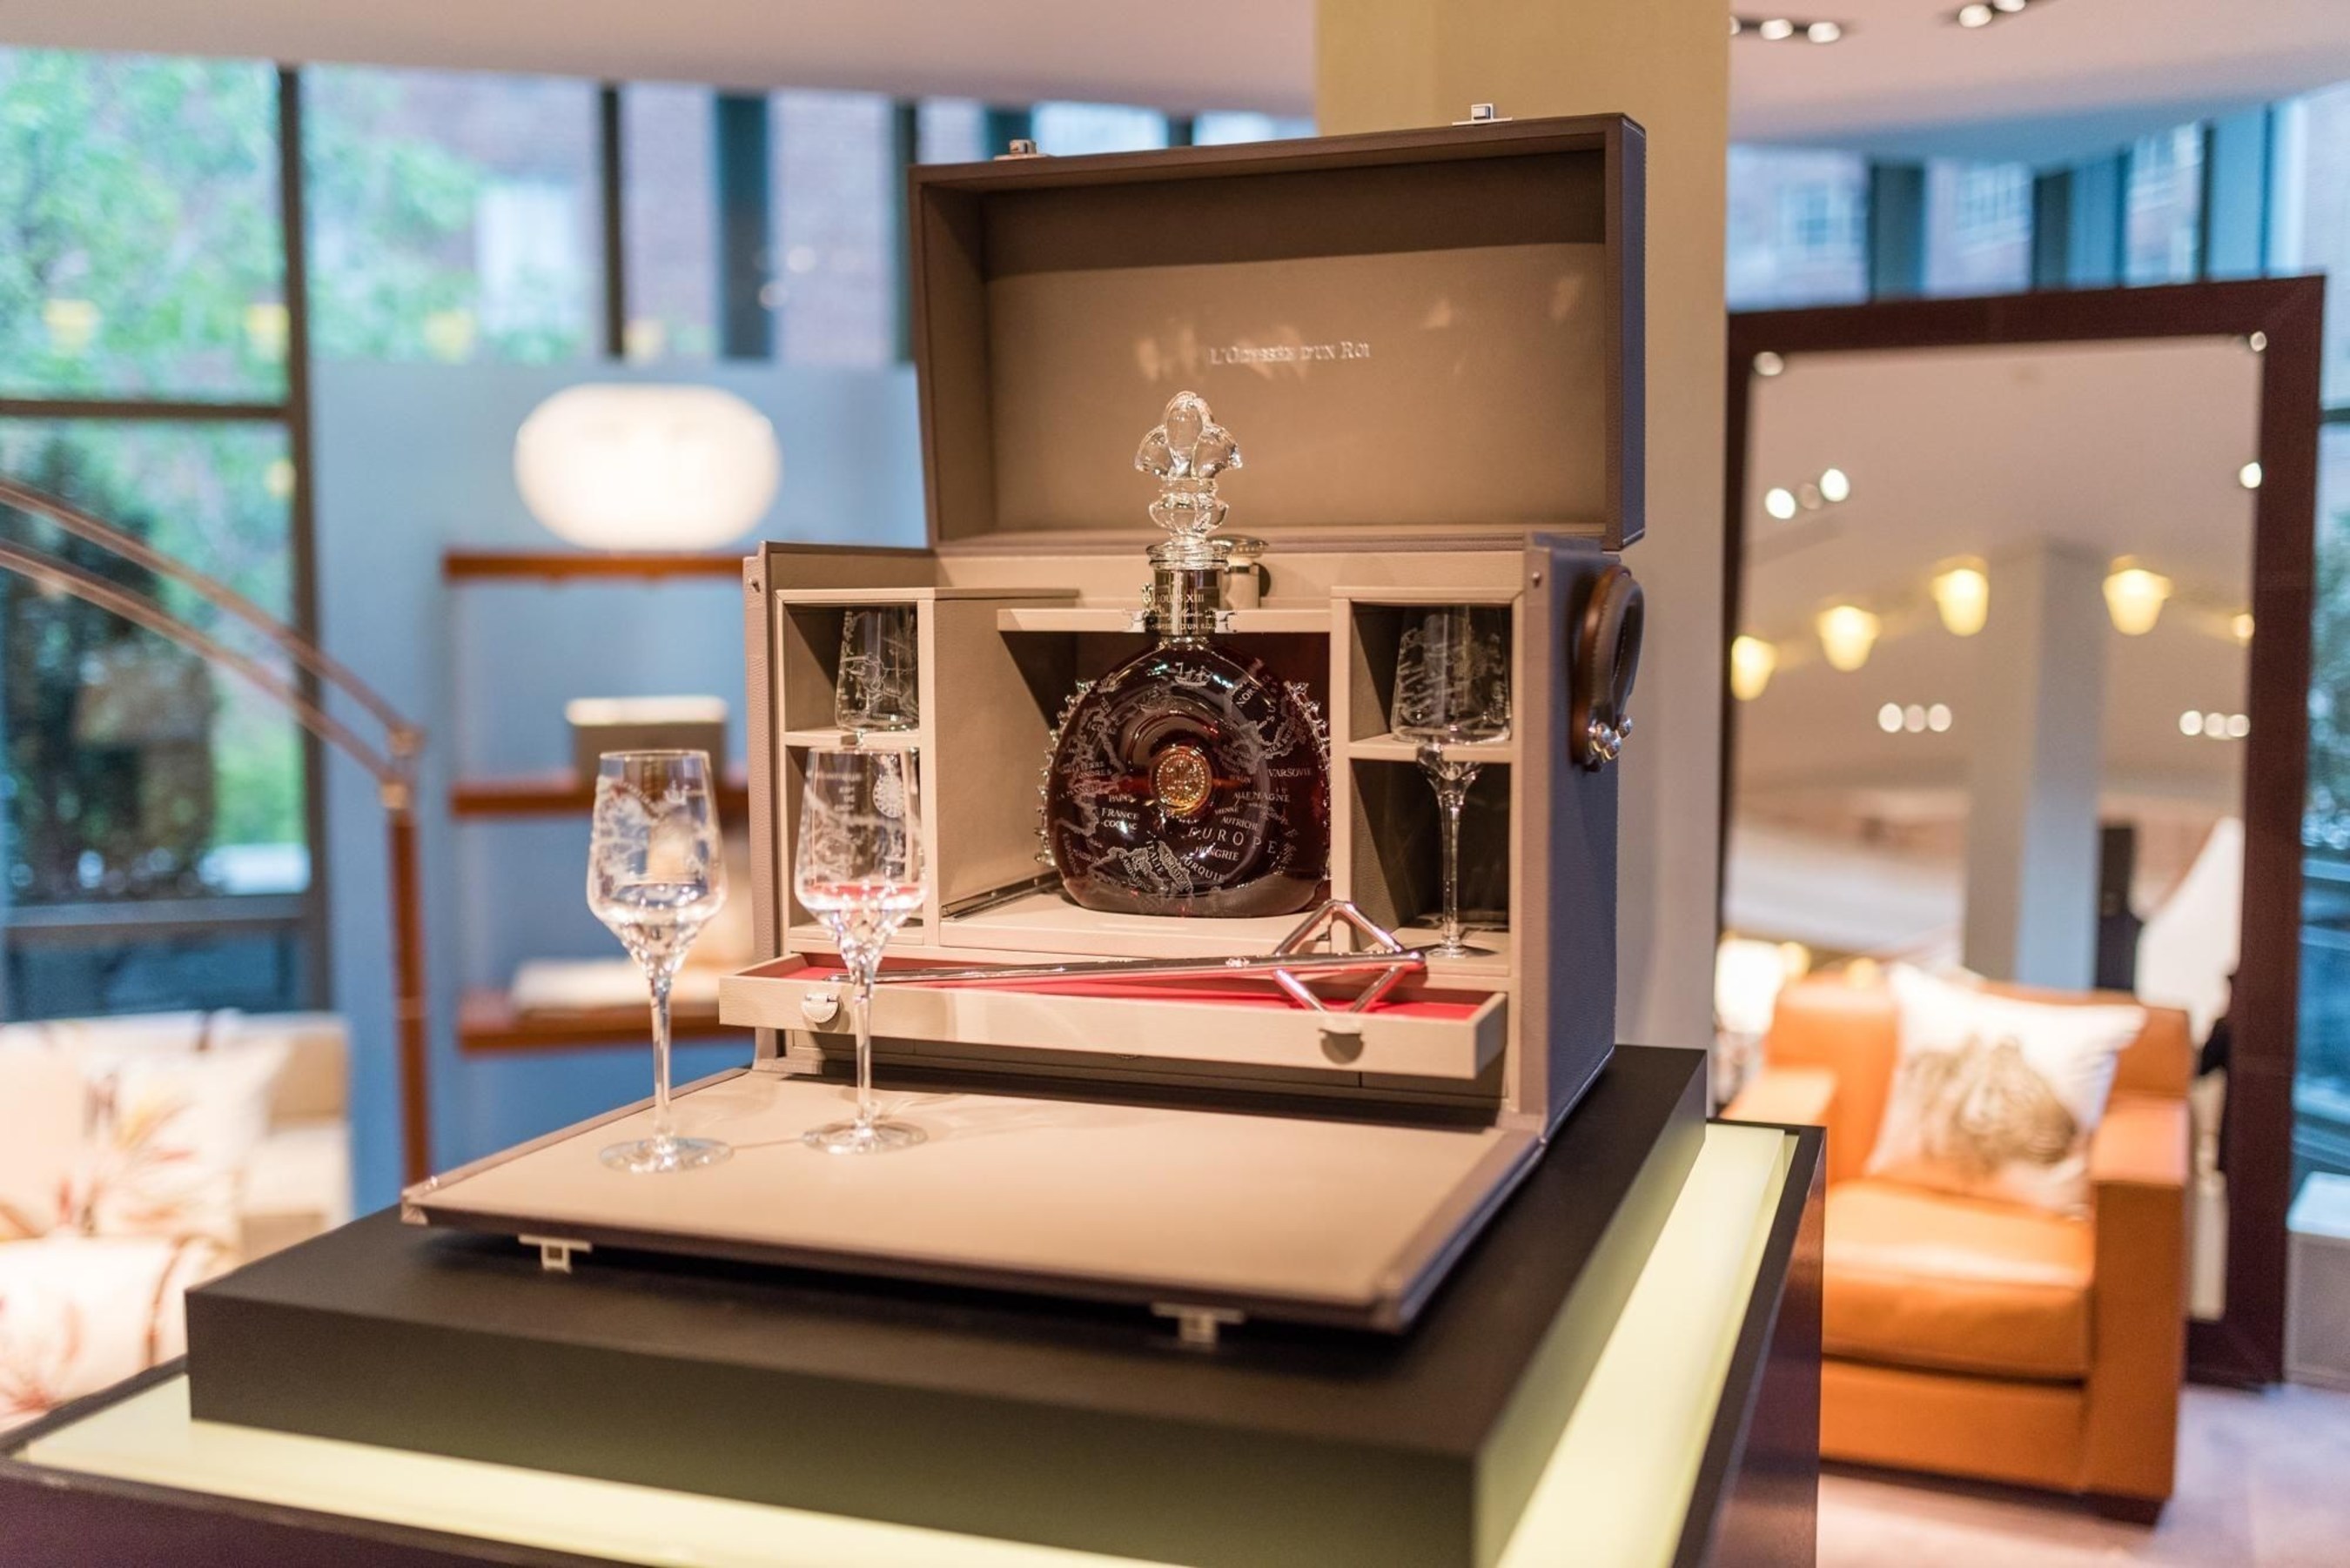 LOUIS XIII fetches record price of US$ 558K for three LOUIS XIII L'ODYSSEE D'UN ROI limited editions auctioned by Sotheby's (PRNewsFoto/LOUIS XIII COGNAC)